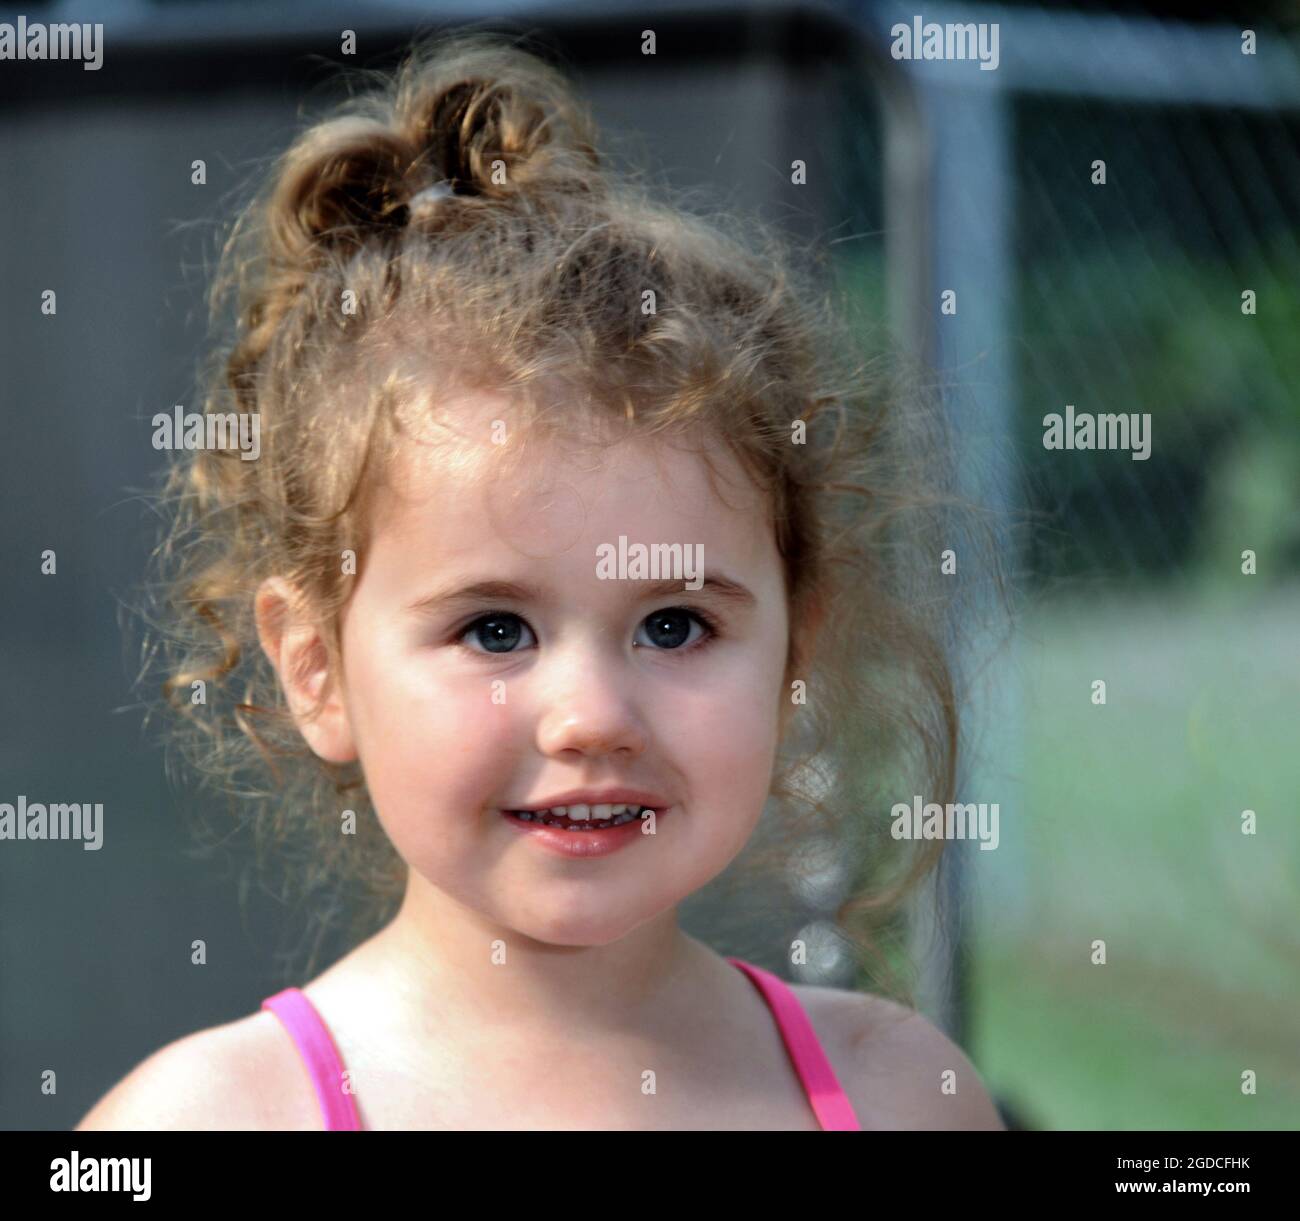 Curls surround little girls head.  Closeup shows the cute twinkle in her eyes.  Pink straps on her shoulders. Stock Photo